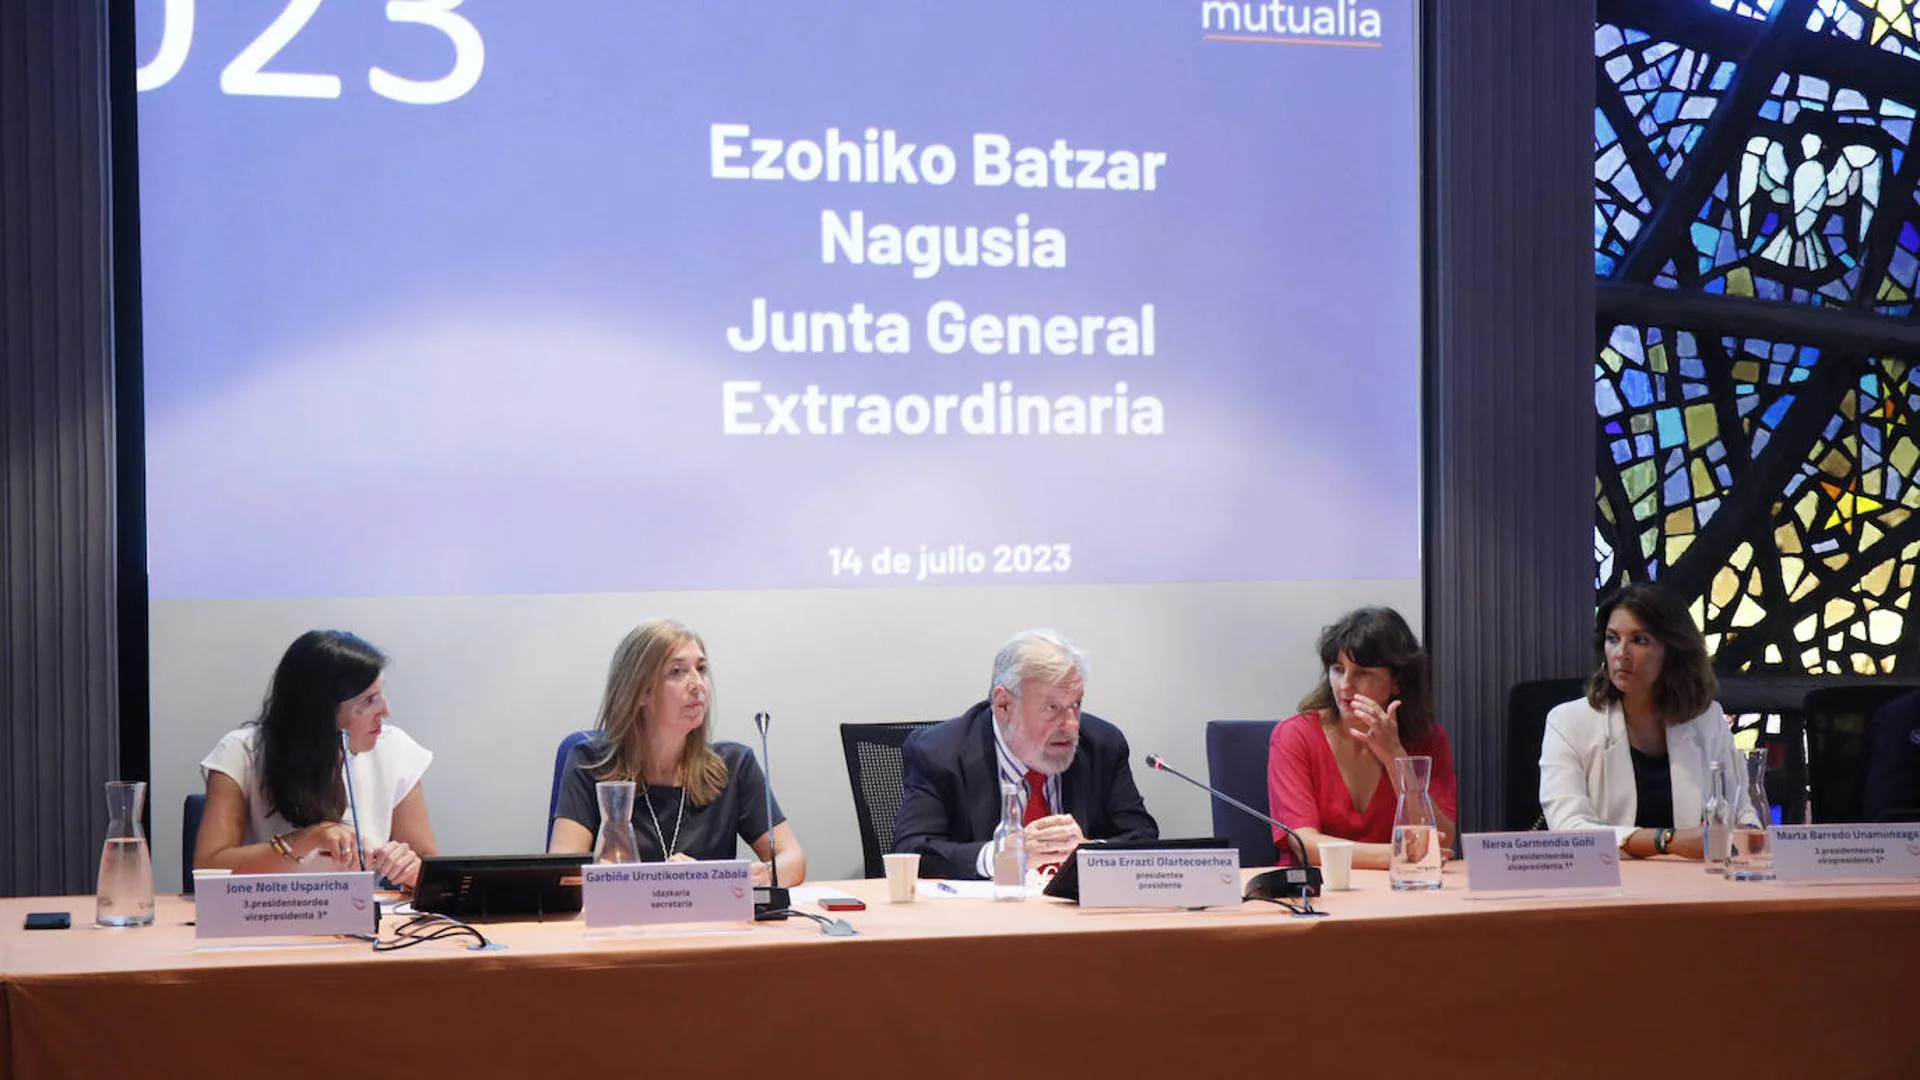 Mutualia offered coverage to 420,000 Basques in 2022